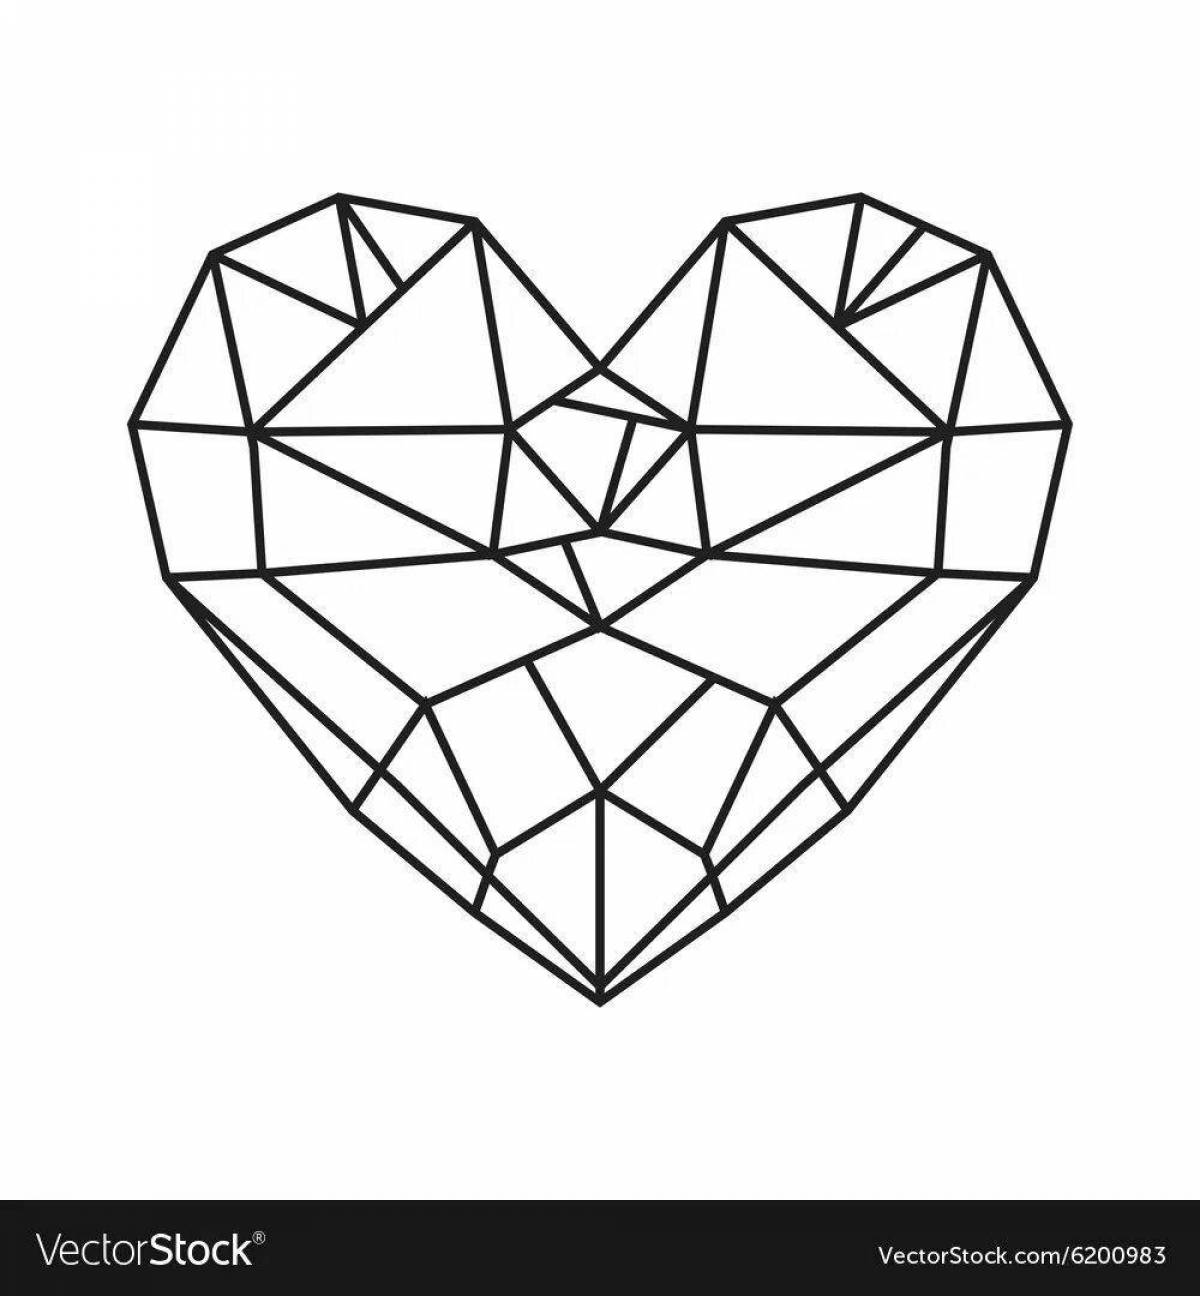 Fun coloring page with diamonds for kids